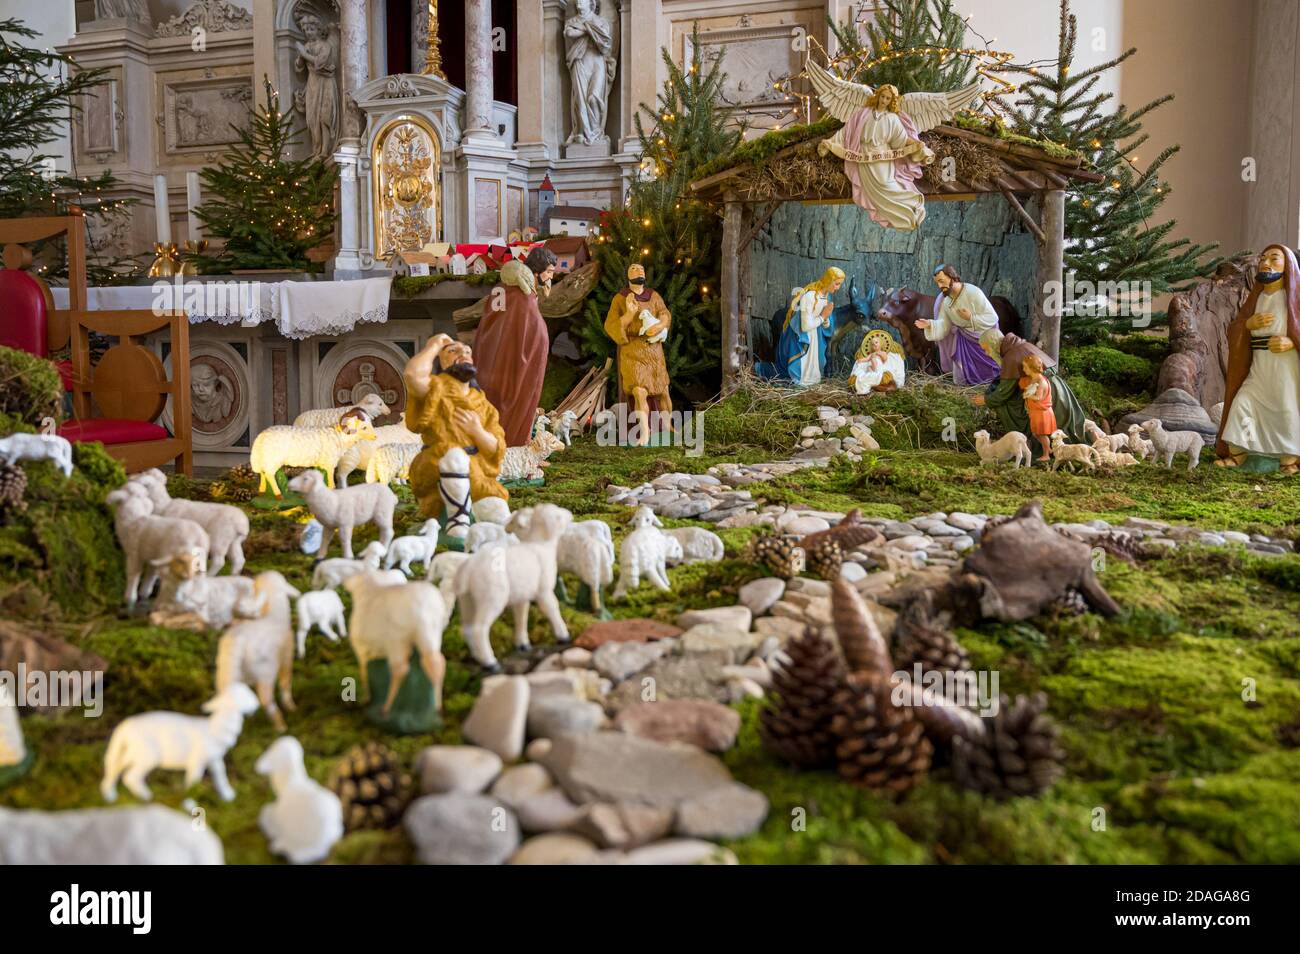 Christmas Nativity scene in local church made with great care and ...